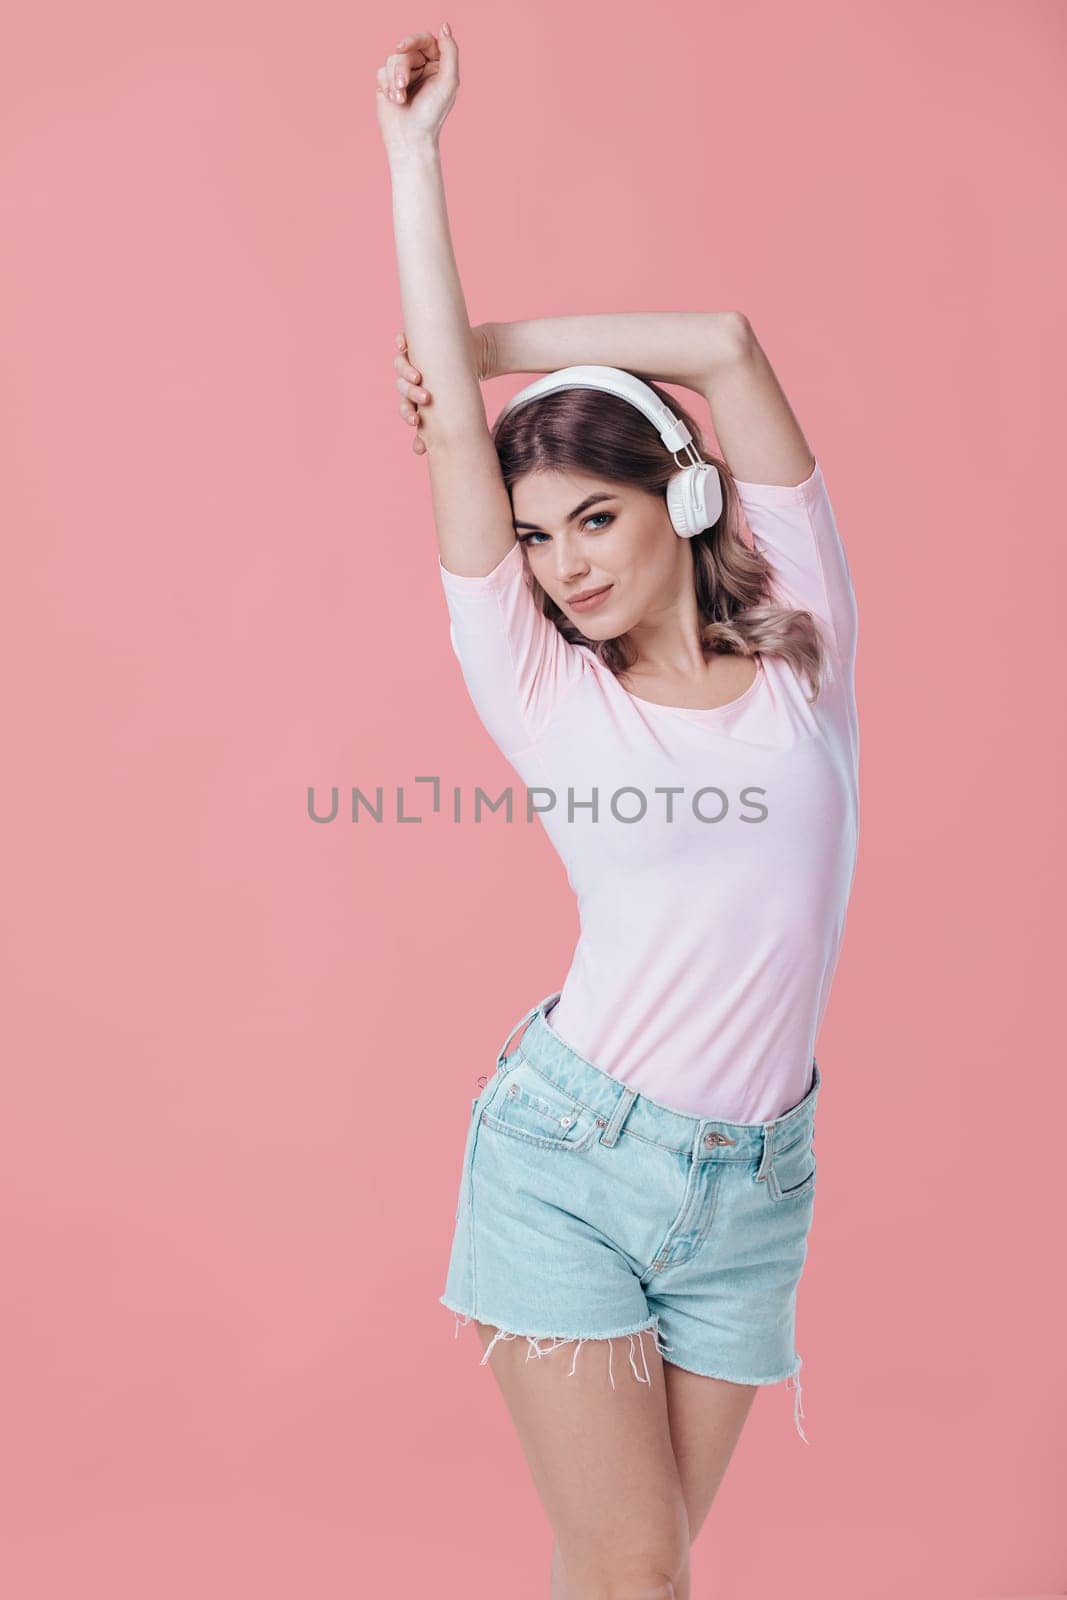 beautiful blonde woman in pink t-shirt and white headphones enjoying listens to music on pink background